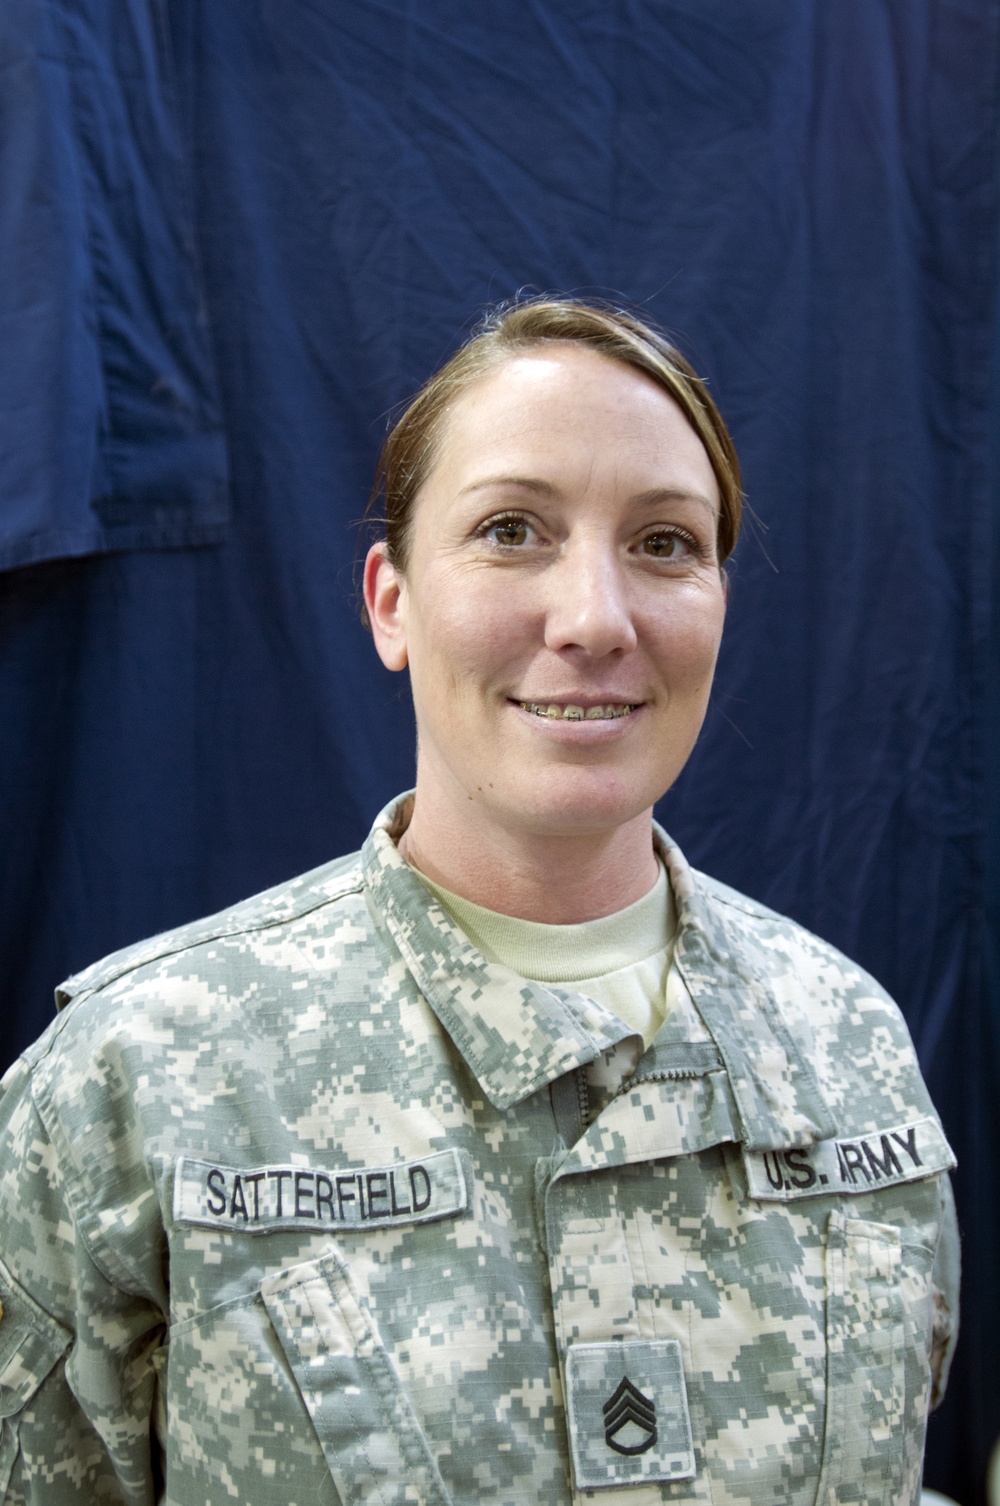 Soldier awarded for Selfless Service